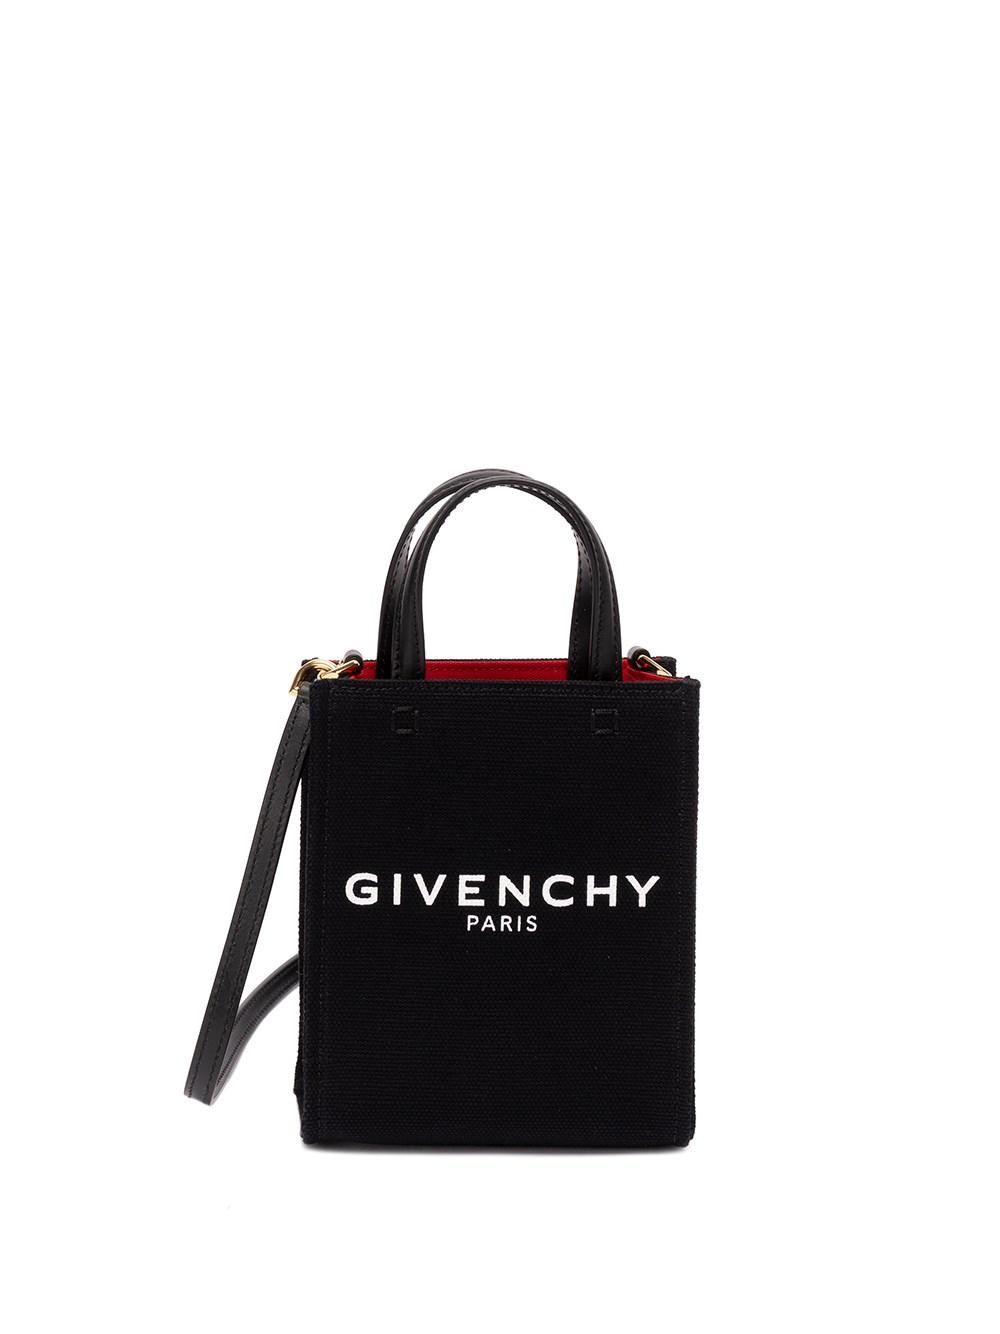 Givenchy Mini G-tote Bag in Cloud Blue